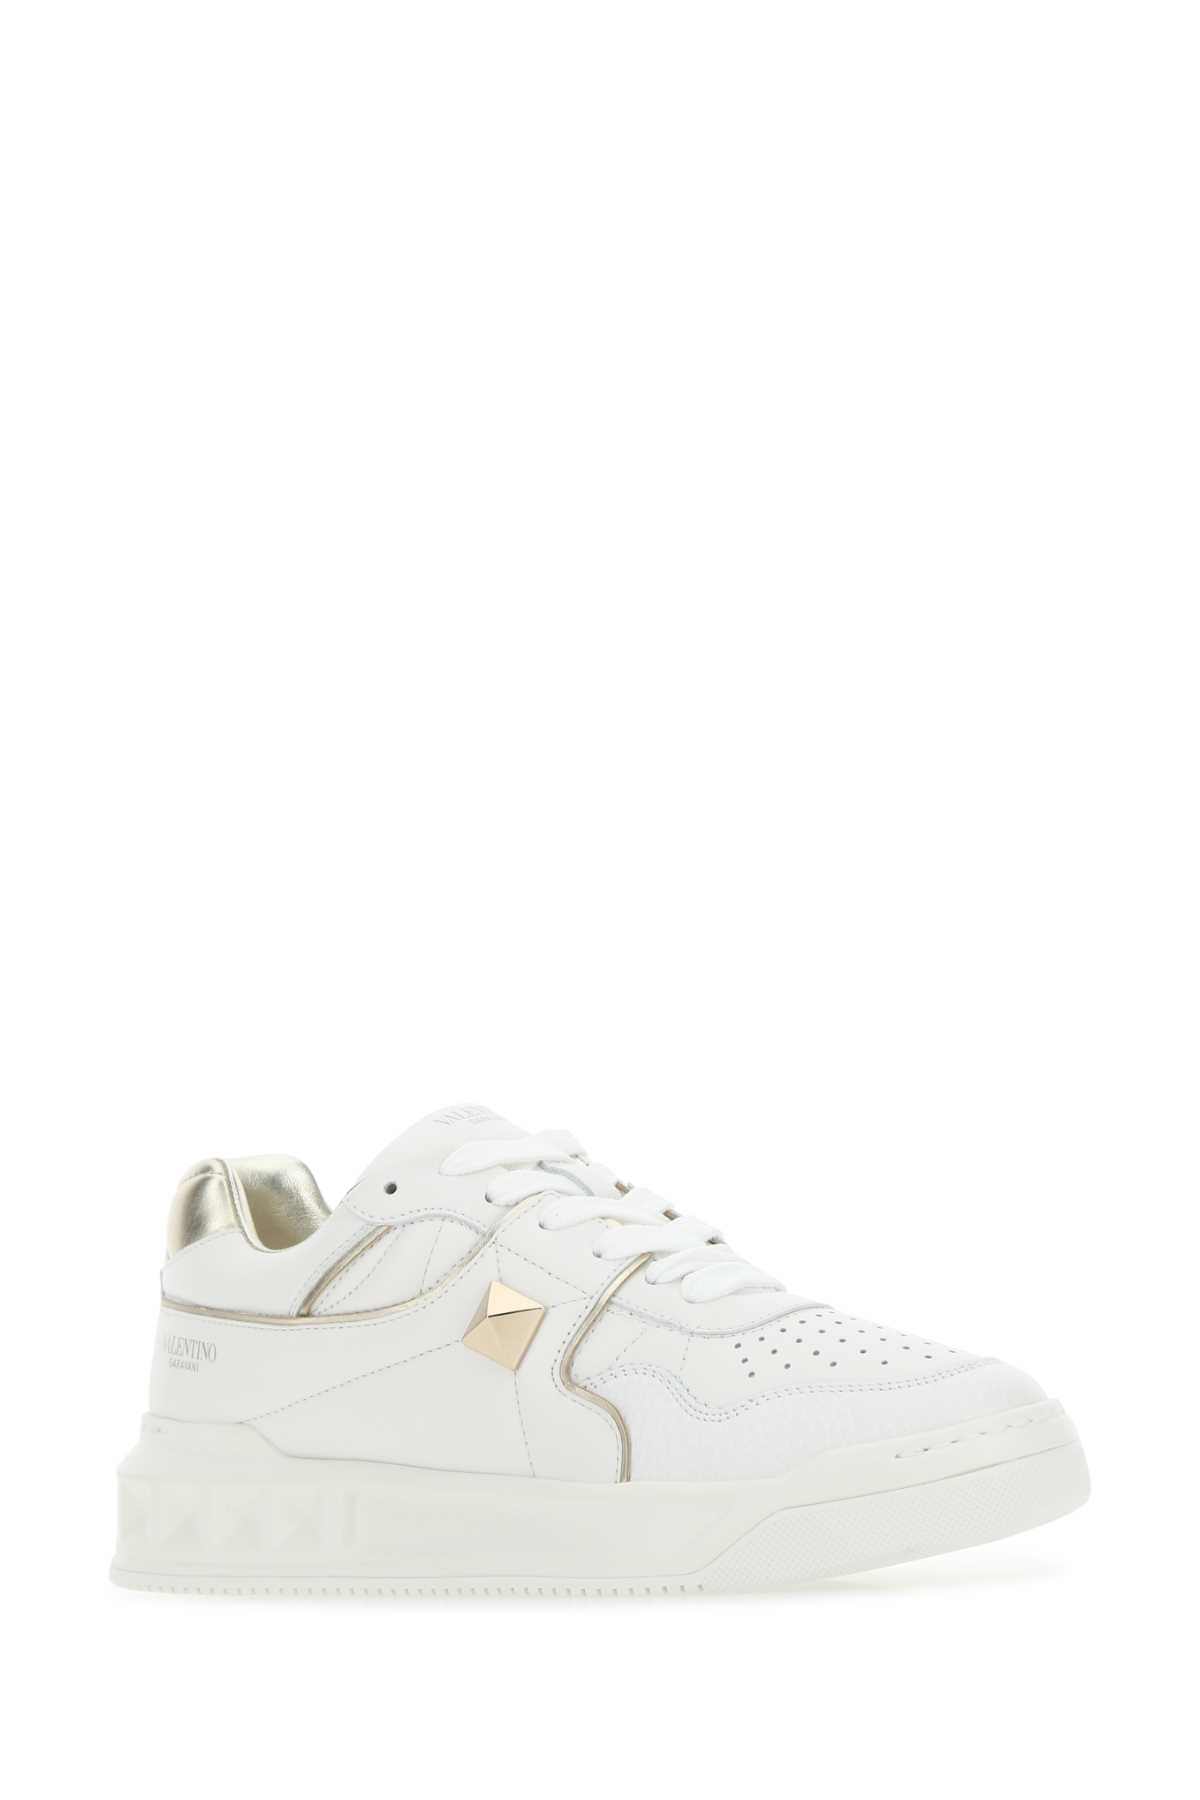 Shop Valentino White Nappa Leather One Stud Sneakers In L71